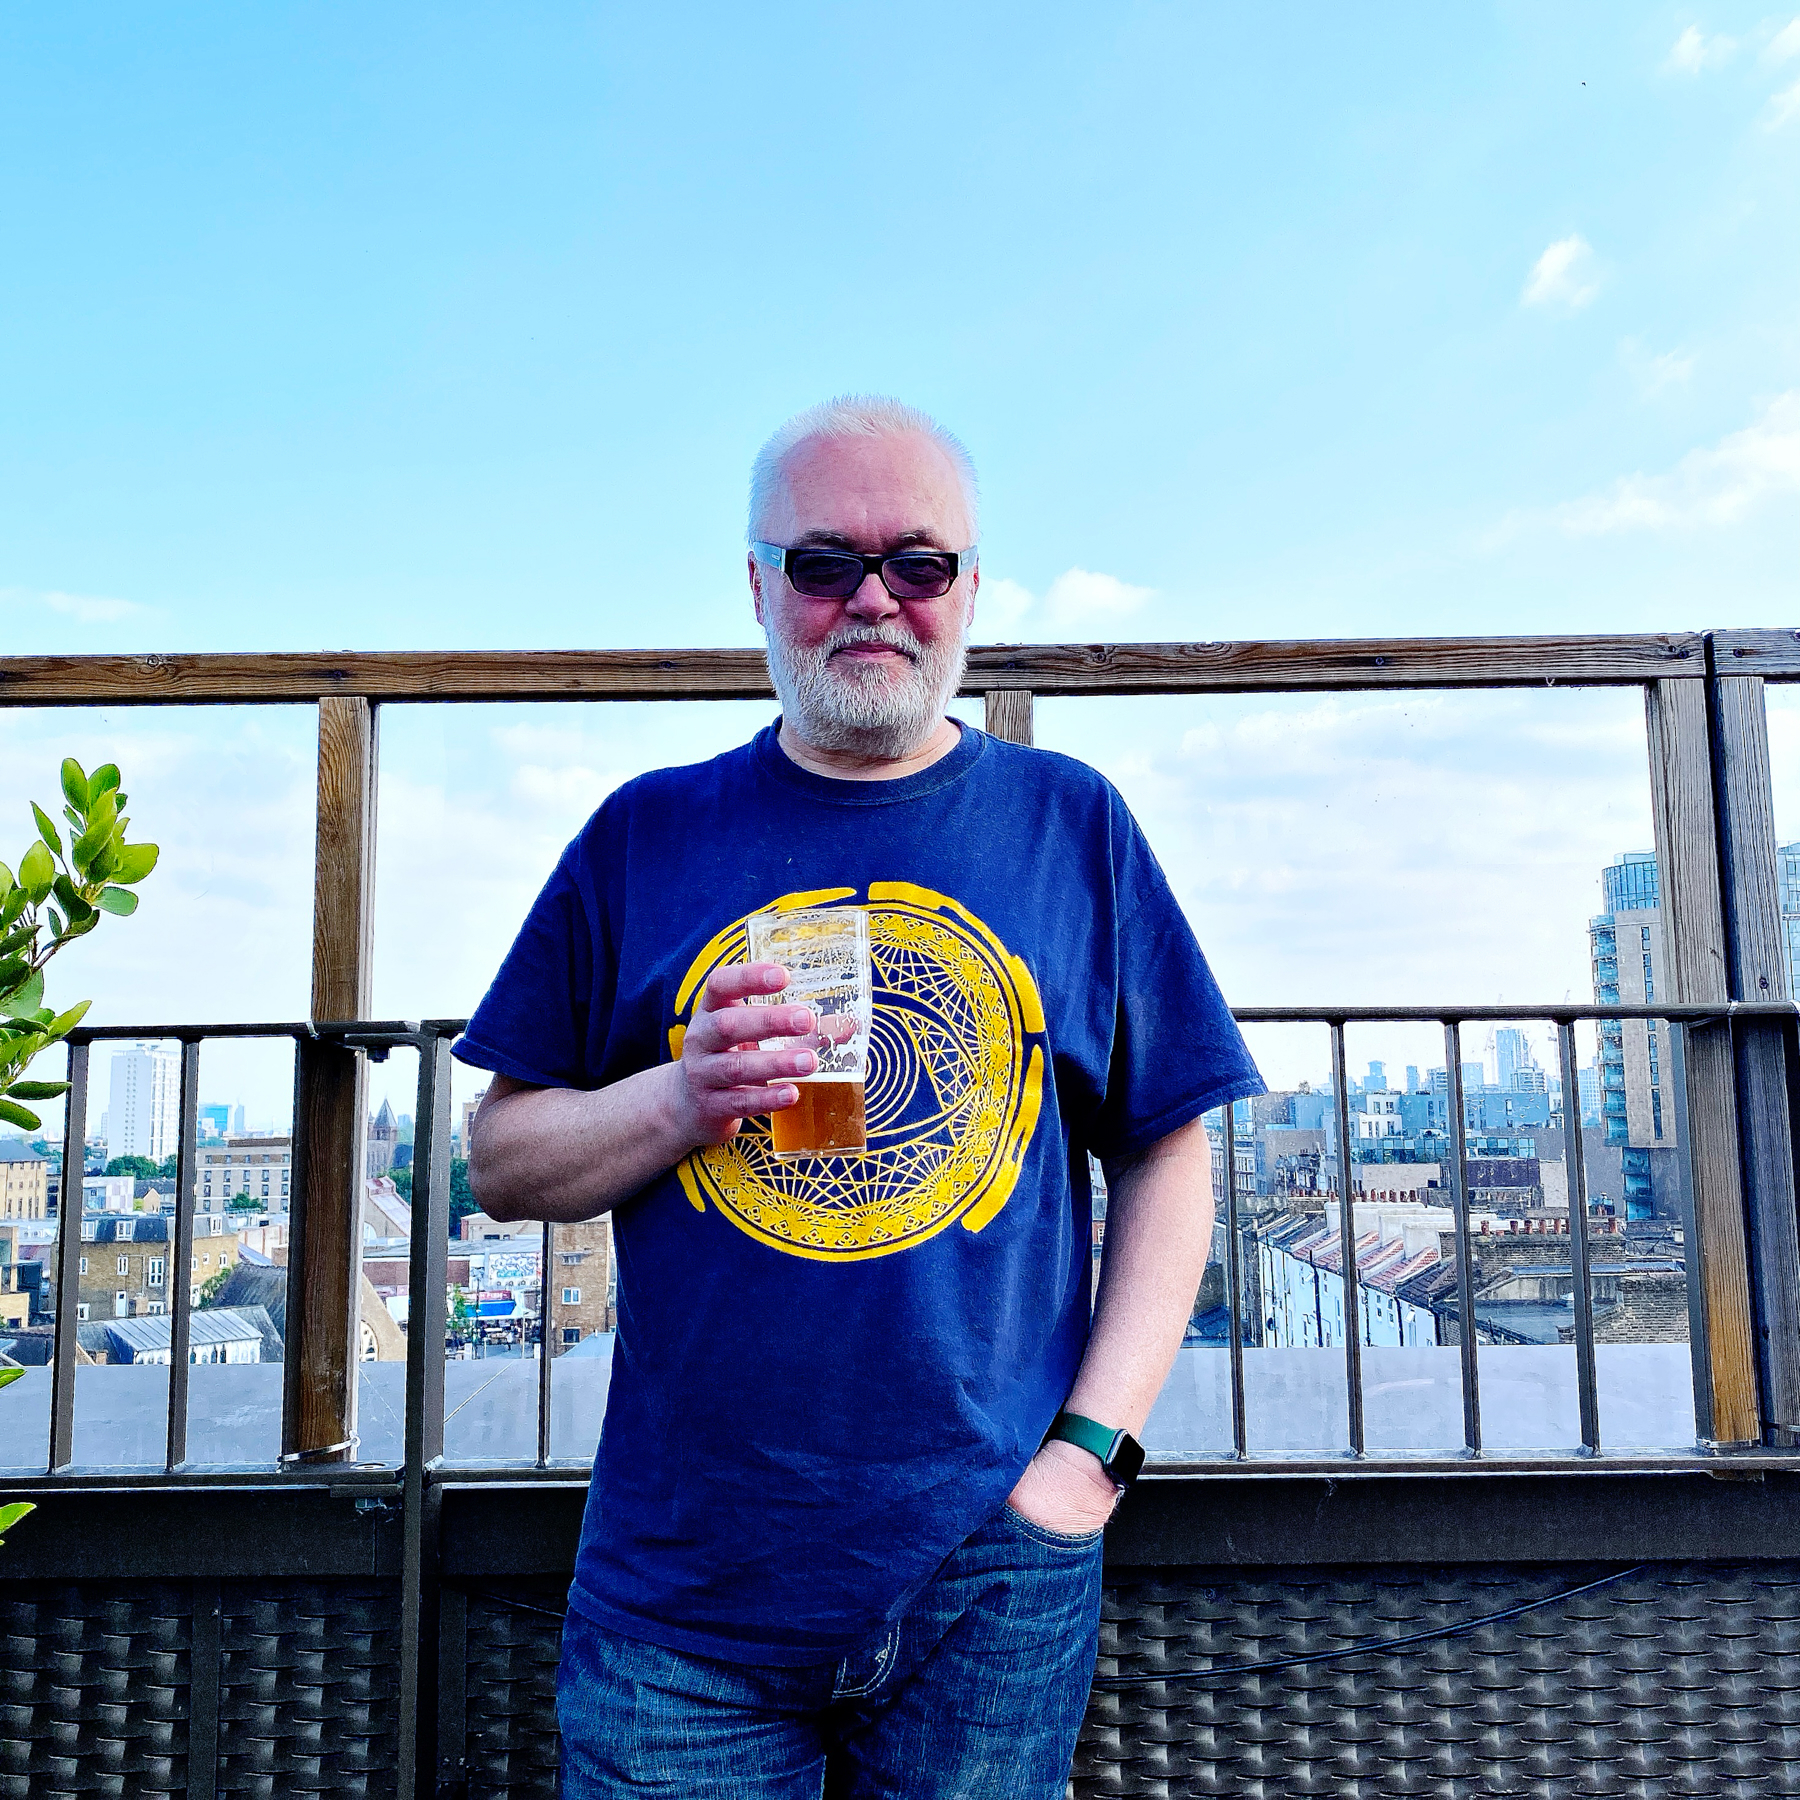 A man with white hair and beard is standing on a rooftop holding a pint of beer. He is wearing sunglasses and a blue T-shirt with a yellow circular design. The background includes a cityscape with buildings and a blue sky.